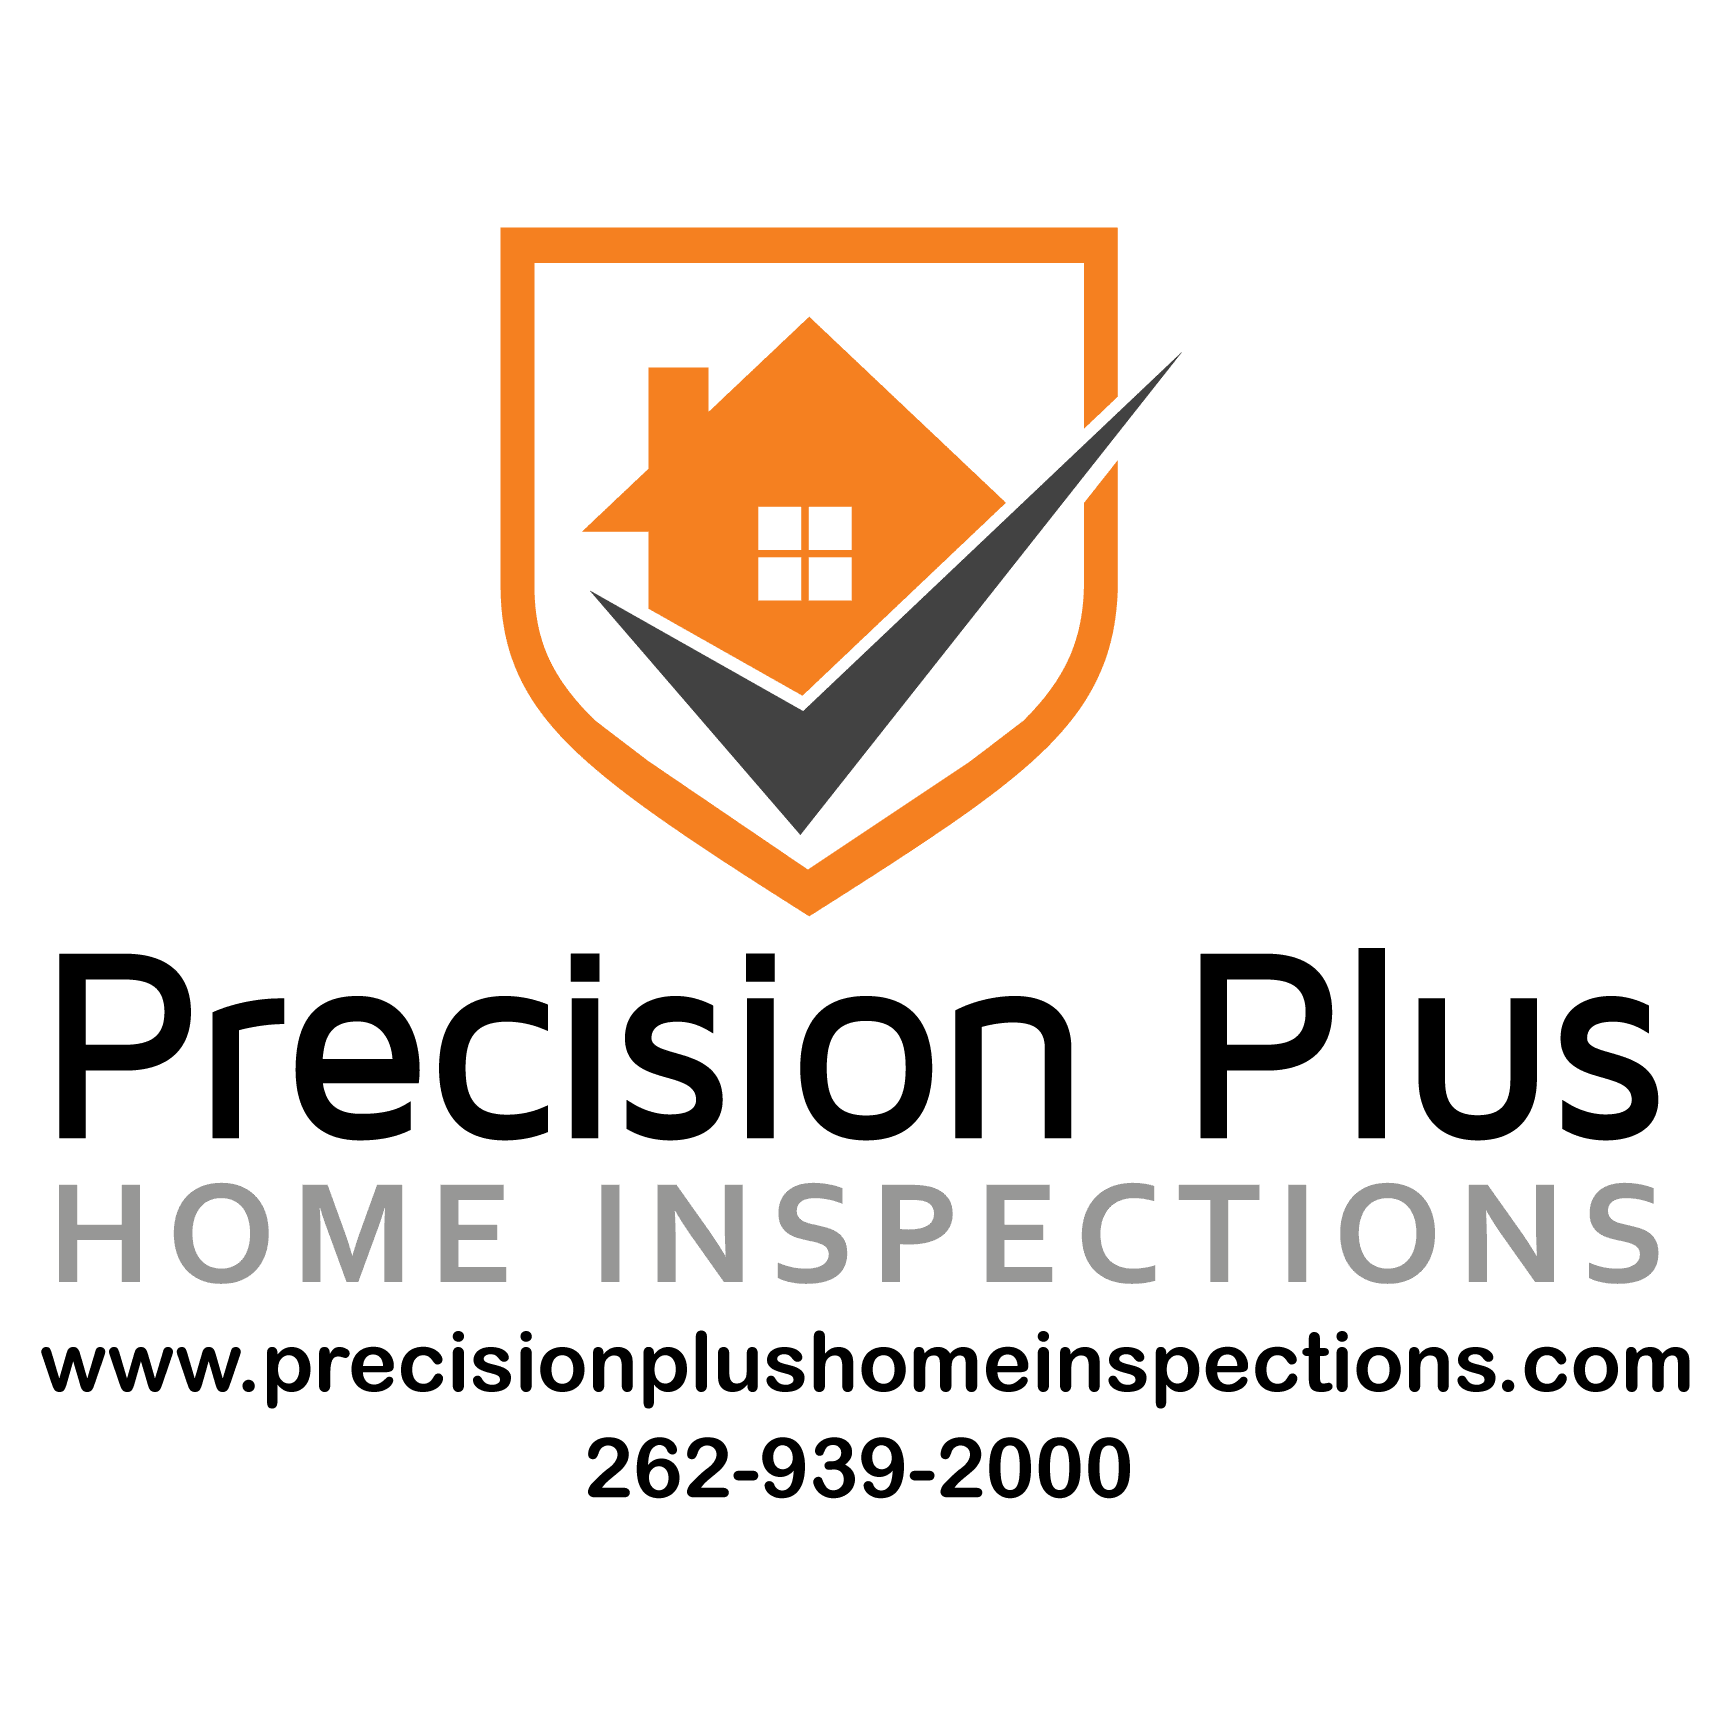 Precision Plus Home Inspections LLC 3517 W S County Line Rd, Caledonia Wisconsin 53108